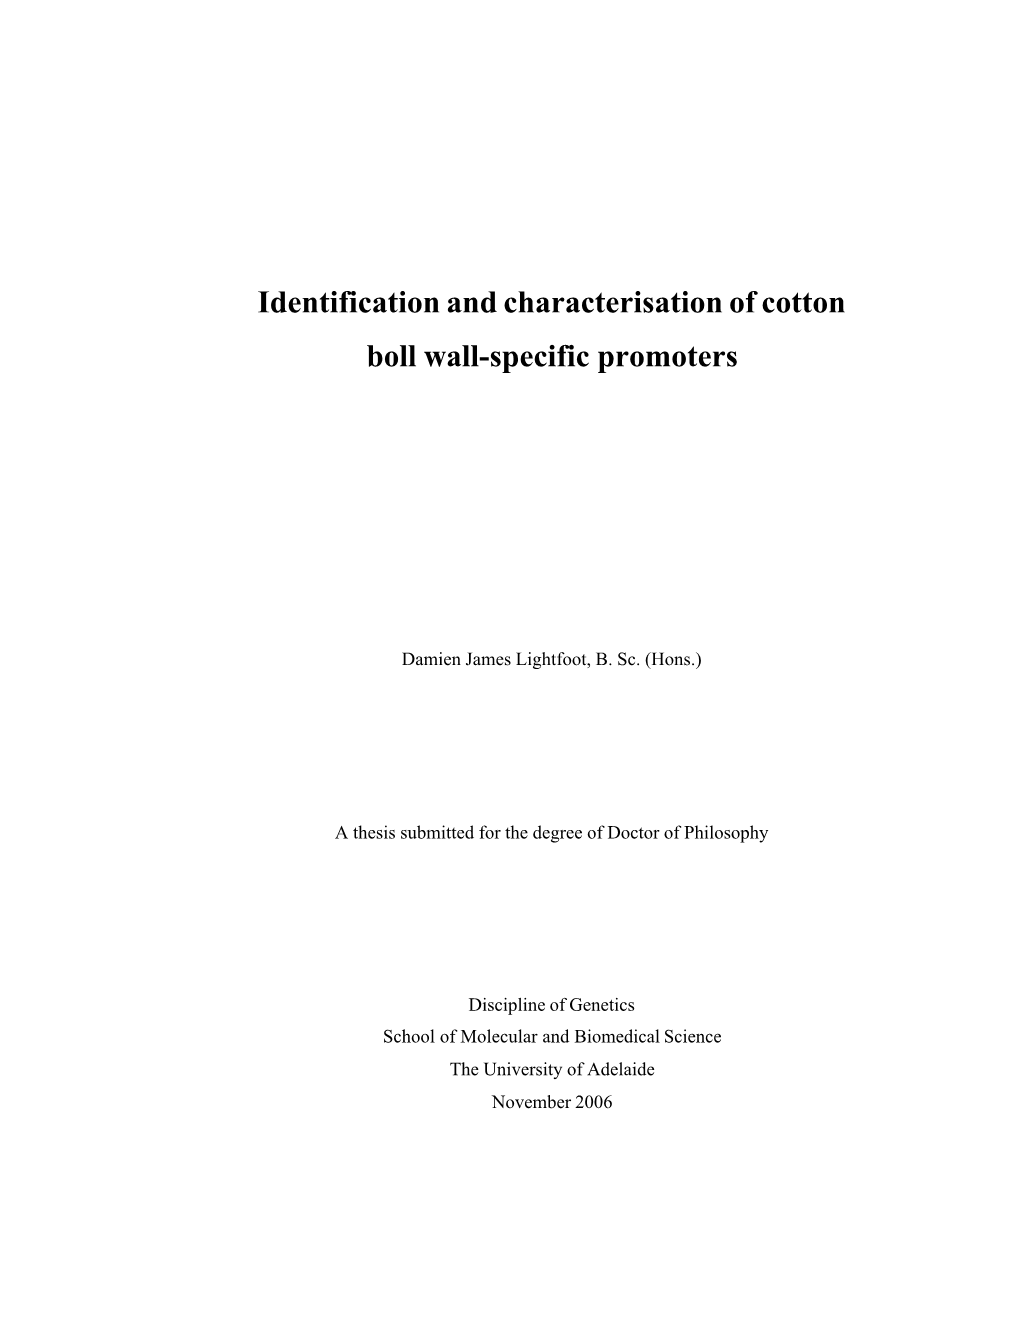 Identification and Characterisation of Cotton Boll Wall-Specific Promoters